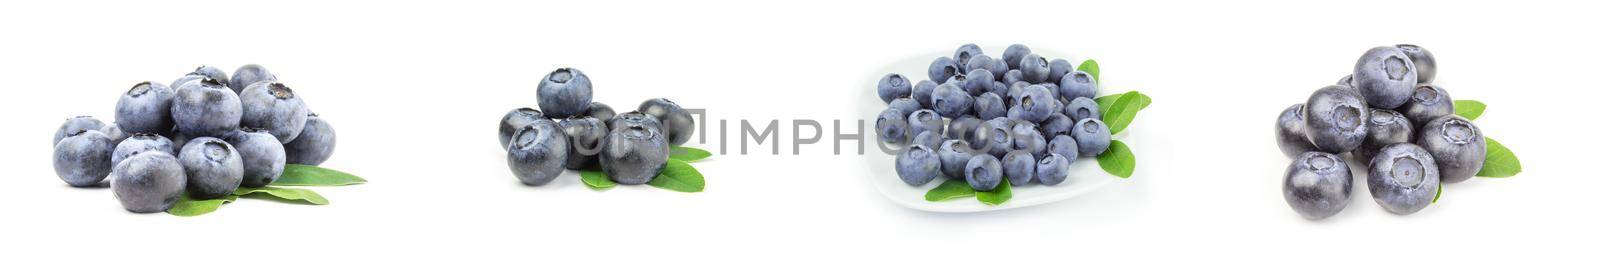 Group of blueberry isolated on a white background cutout by Proff